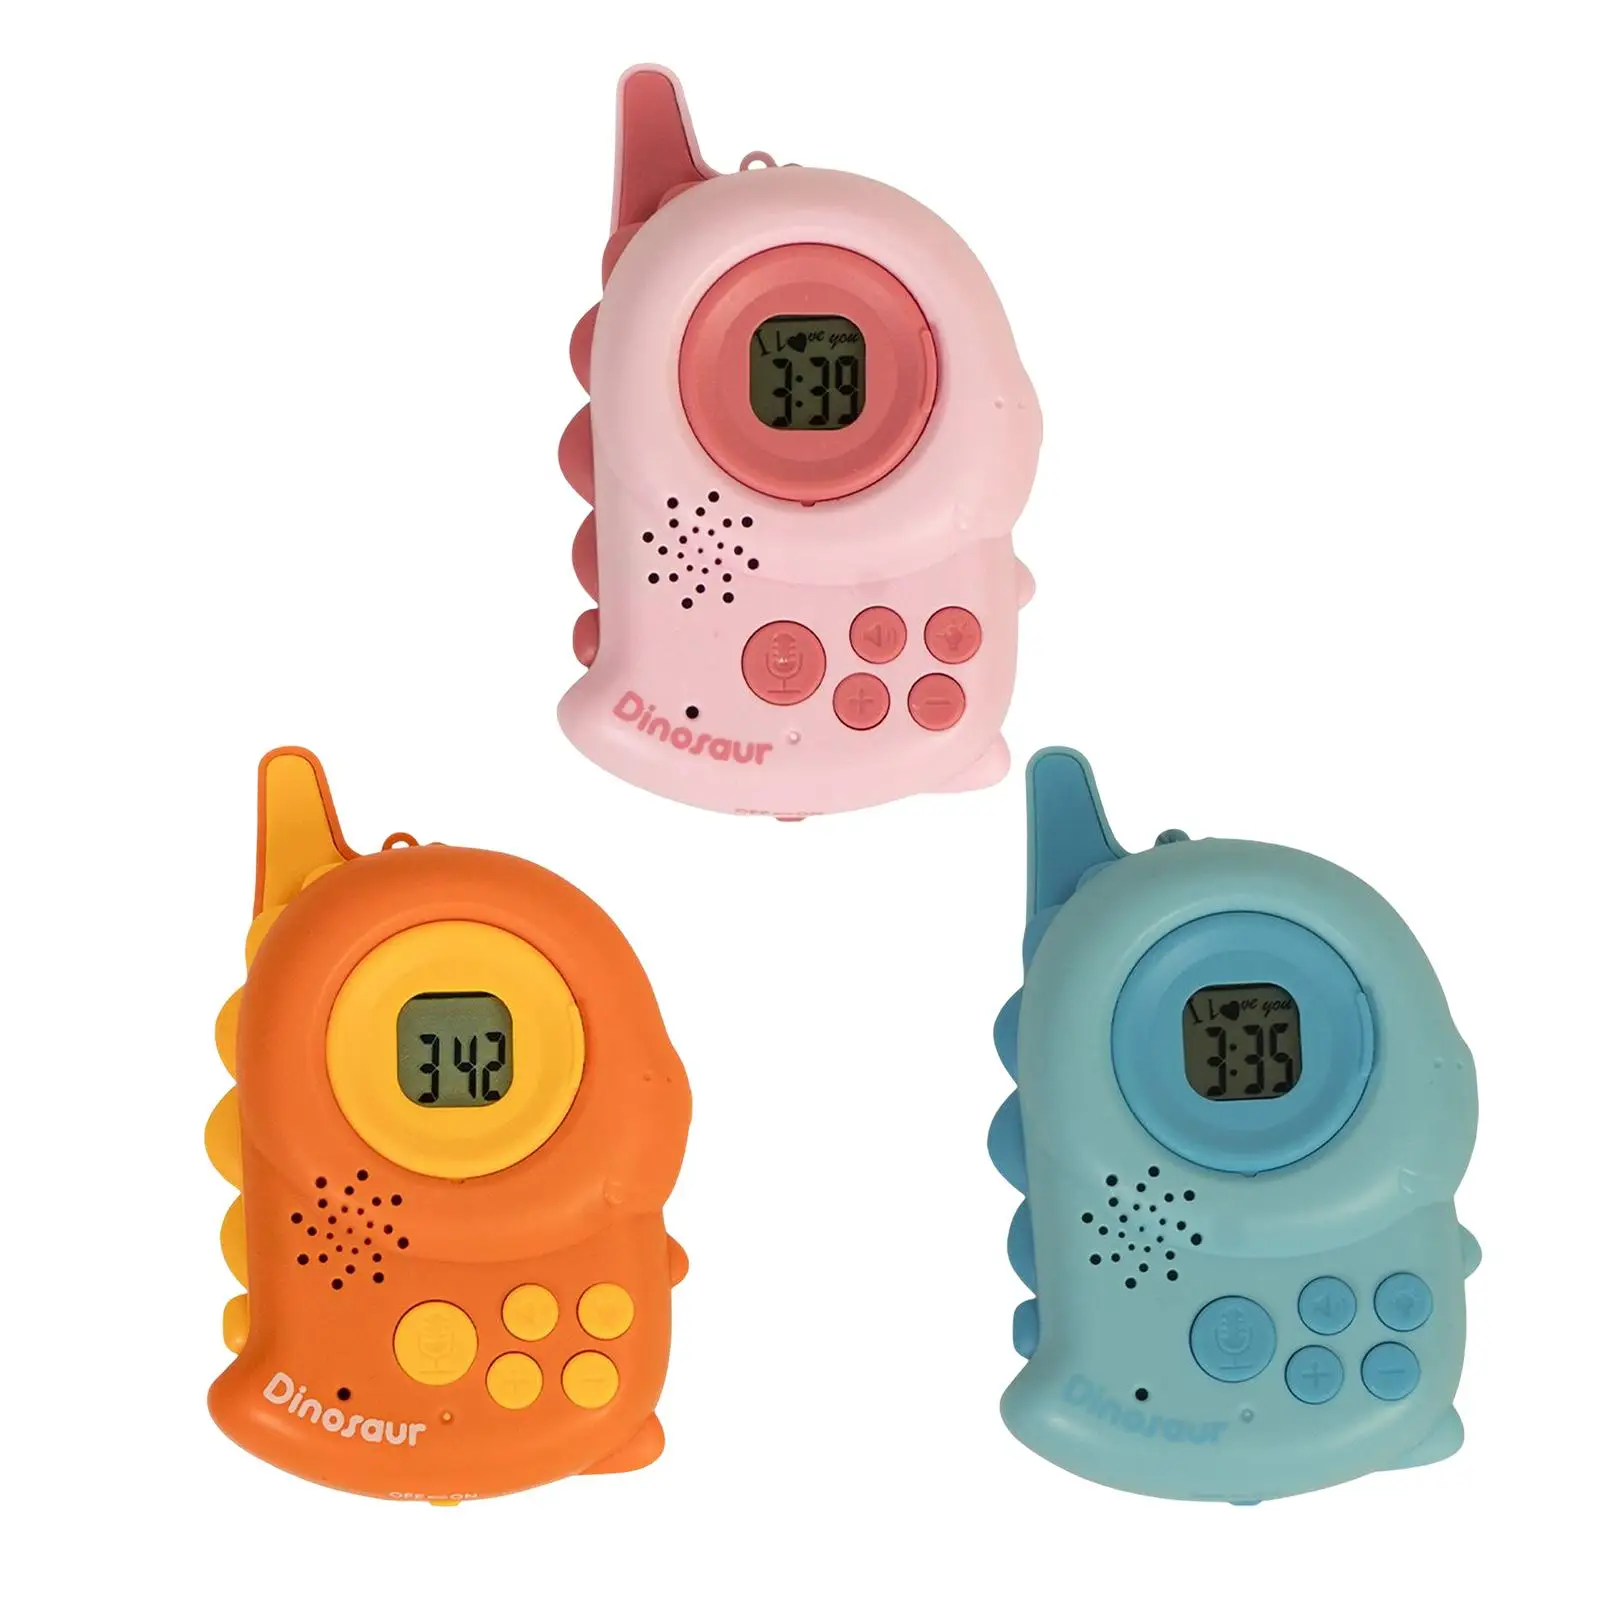 Handheld Walkie Talkies for Kids Lovely Adorable Outdoor Camping Games Cute for Summer Outside Beach Hiking Boys Girls Gifts